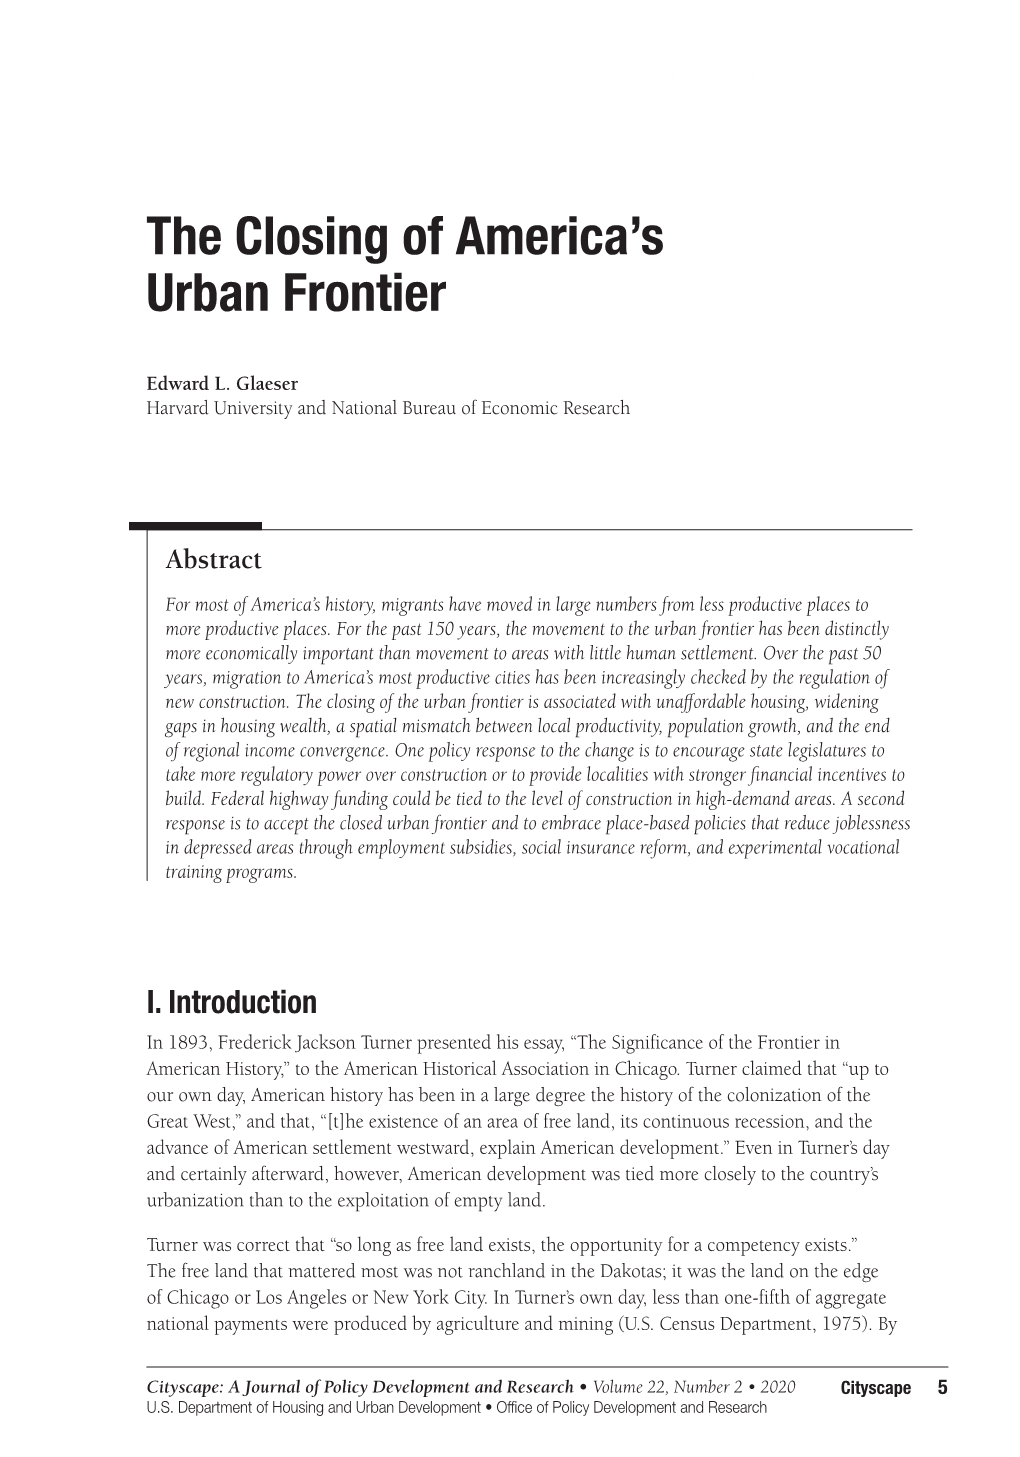 The Closing of America's Urban Frontier